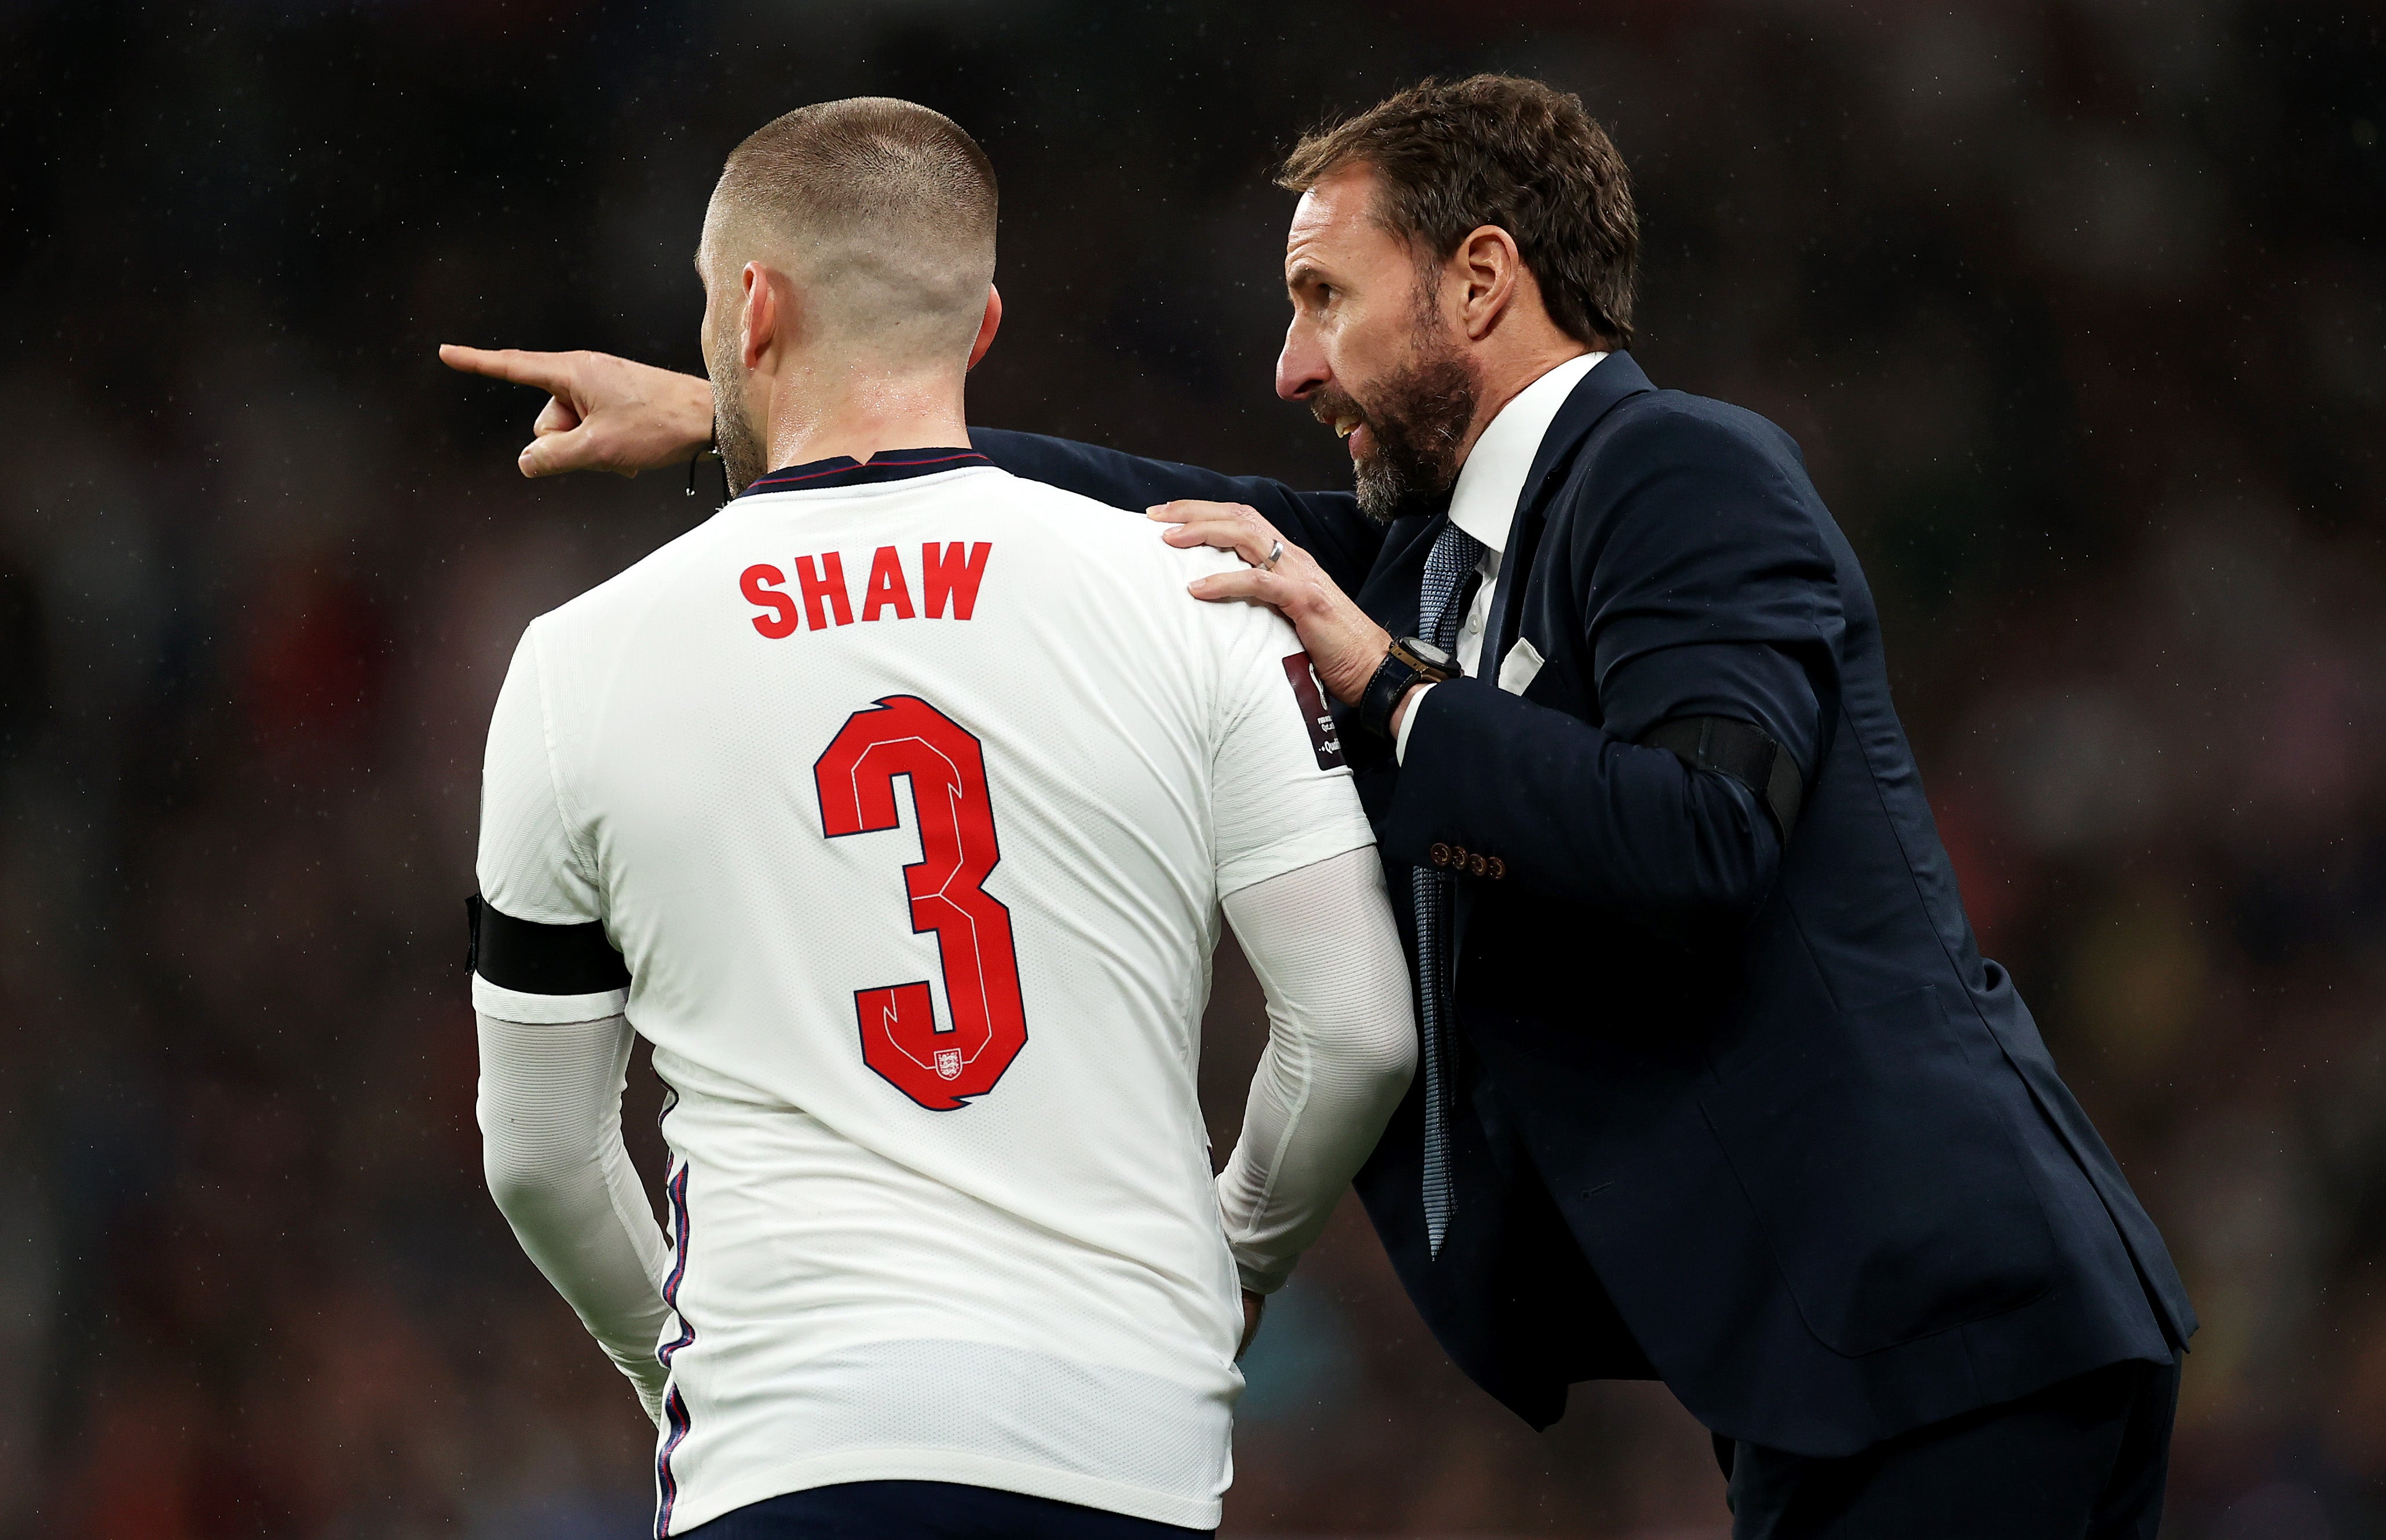 Shaw is a ‘long shot’ to make Euro 2024